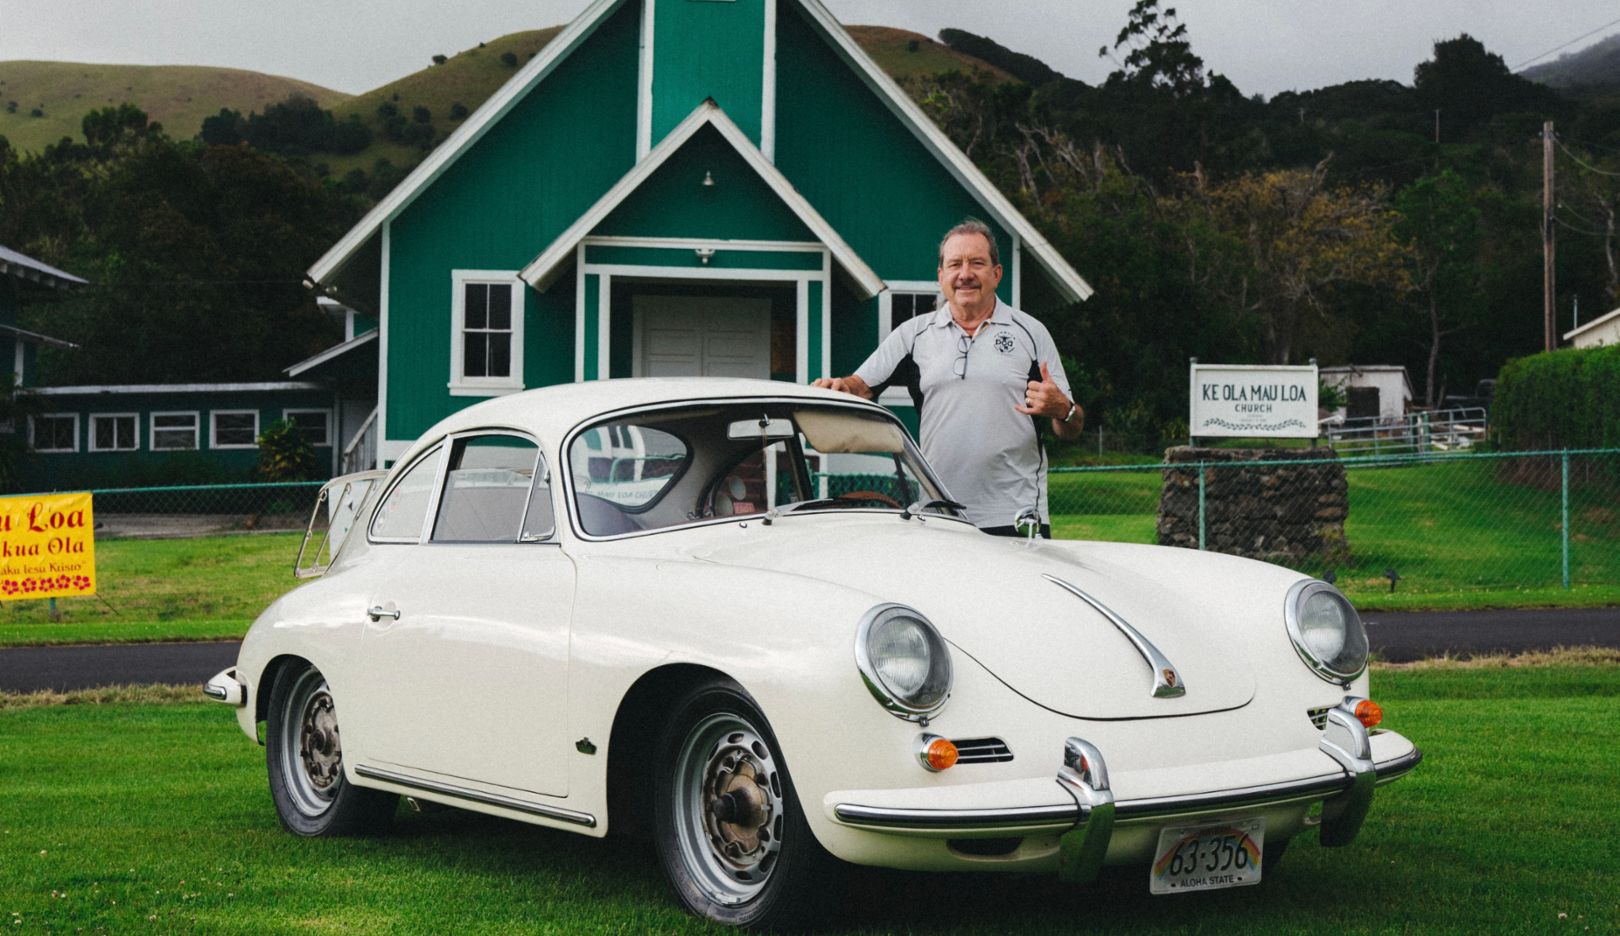 Gunner Mench, President of the Porsche Club on the Big Island, with his 356 B 1600 Super.